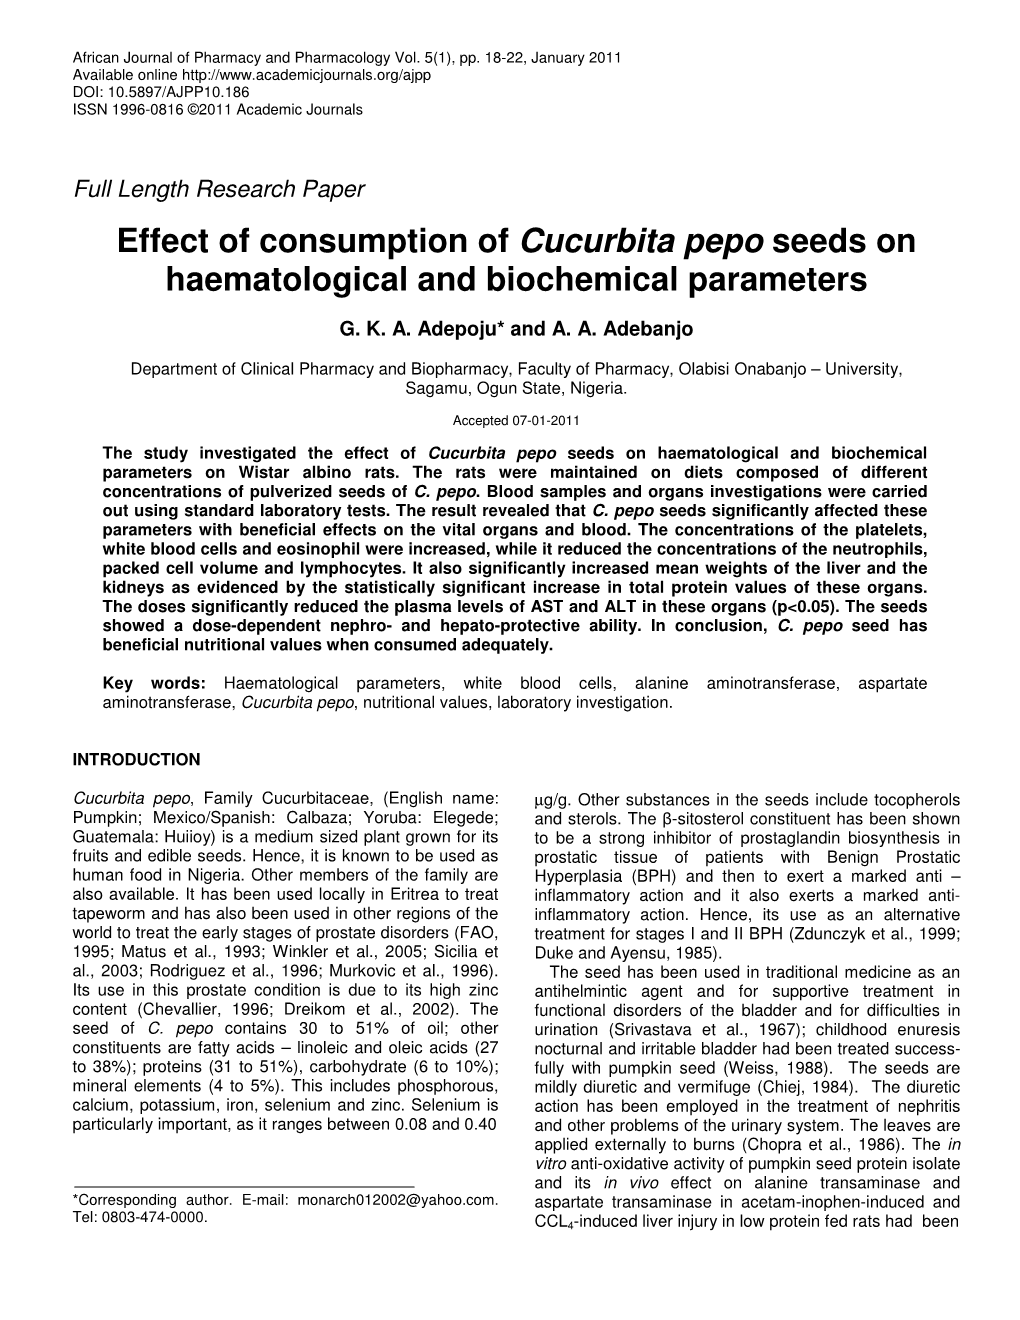 Effect of Consumption of Cucurbita Pepo Seeds on Haematological and Biochemical Parameters